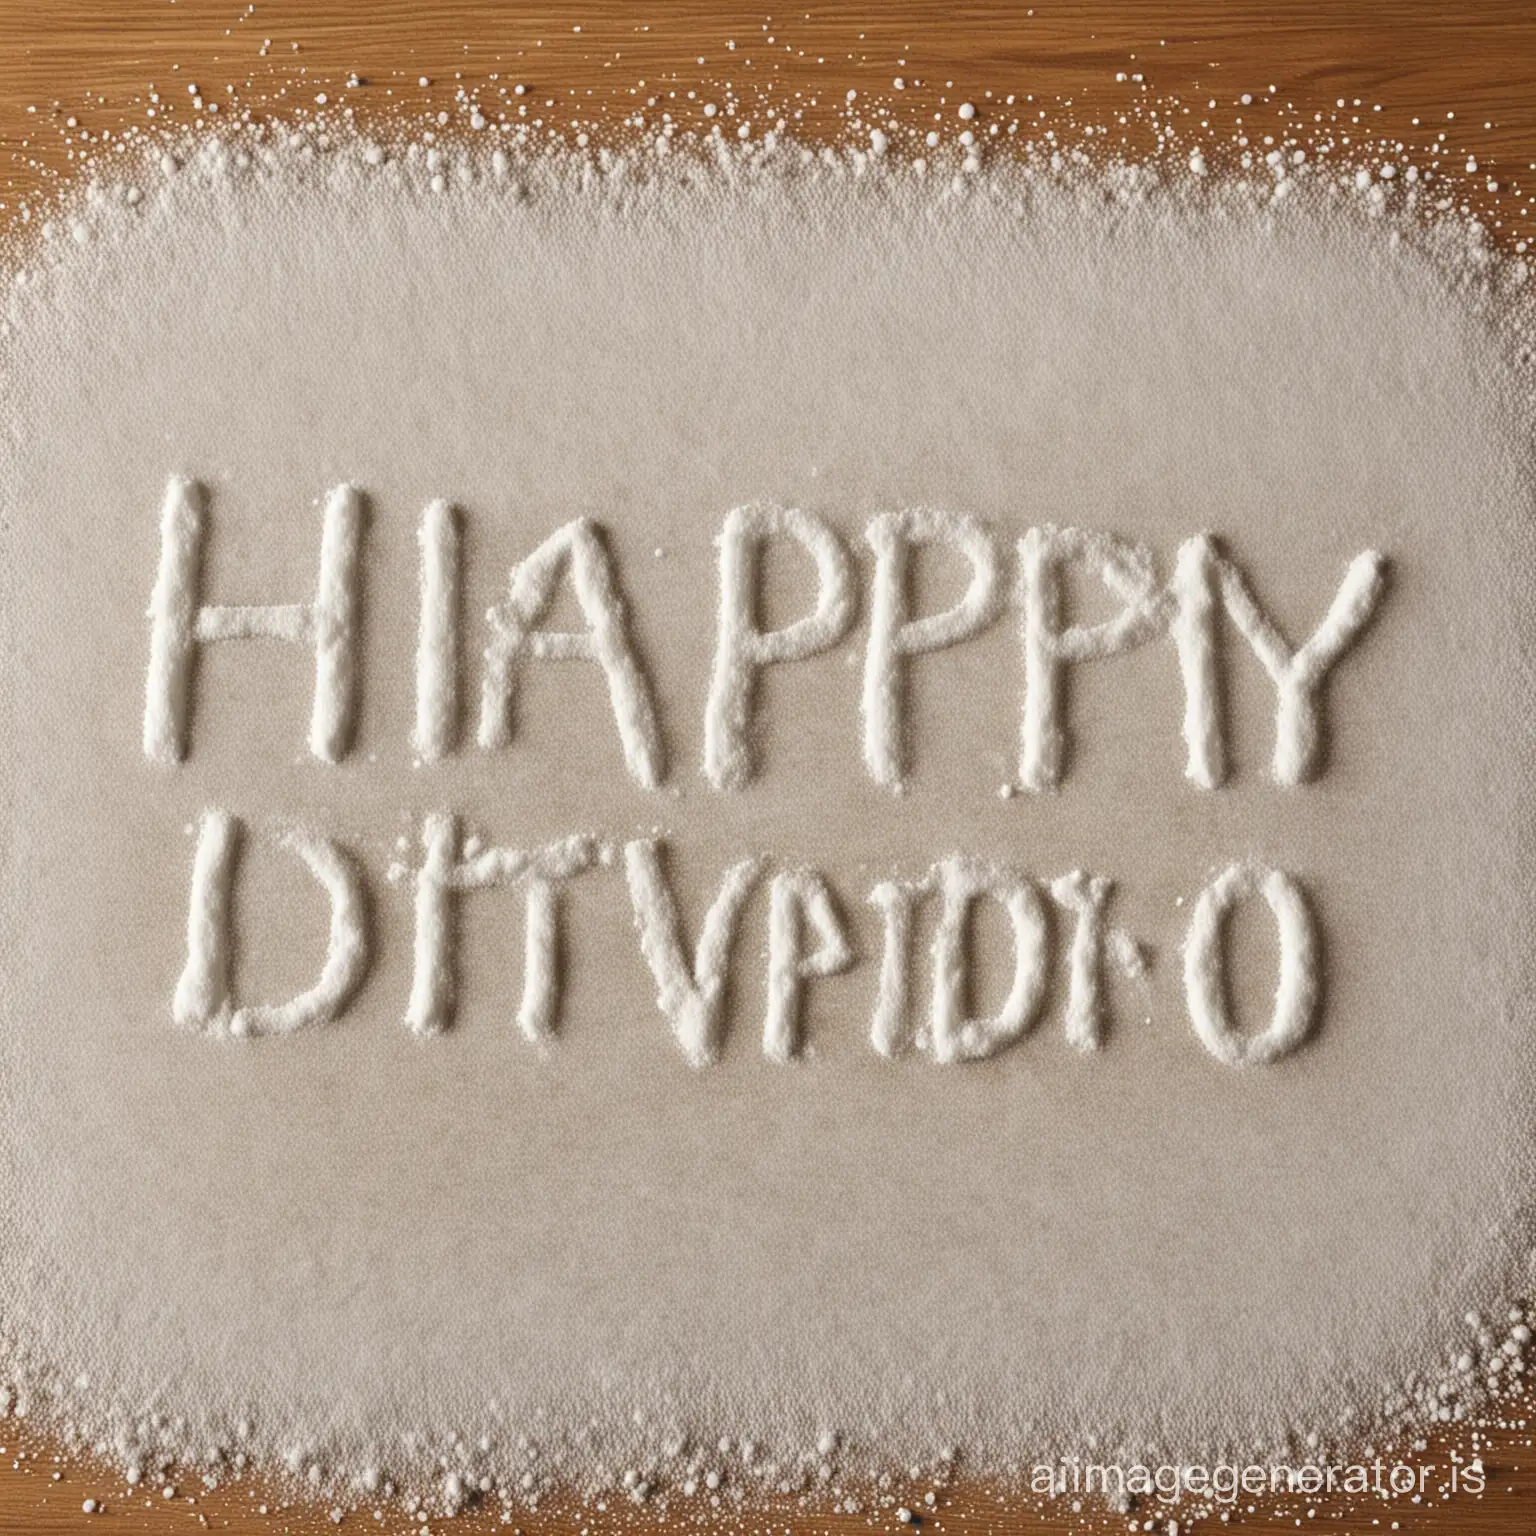 a table with white powder on top and with this powder written word happybdaycaxondo!